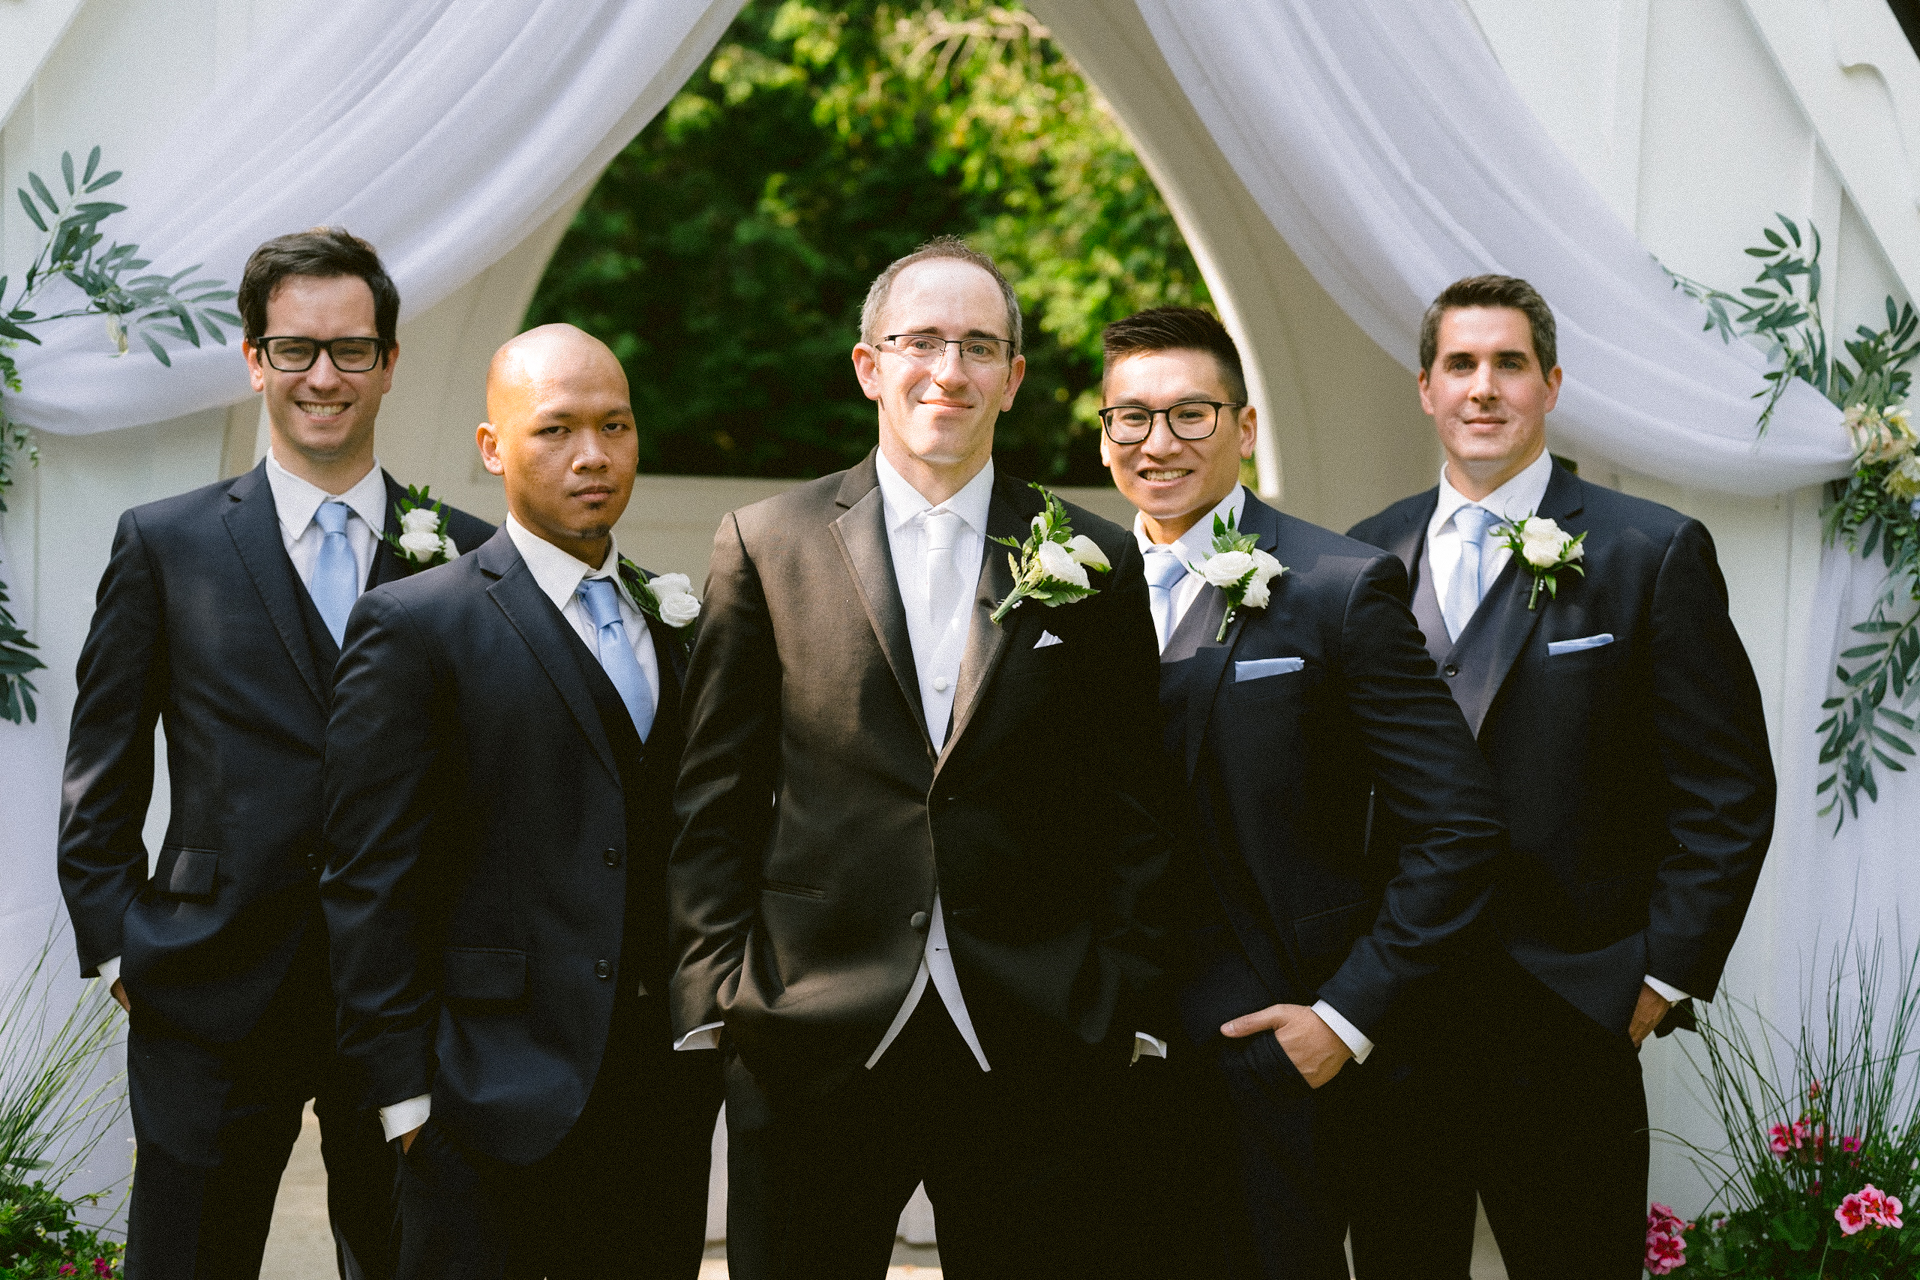 Groom and groomsmen standing together in formal attire at a wedding ceremony.